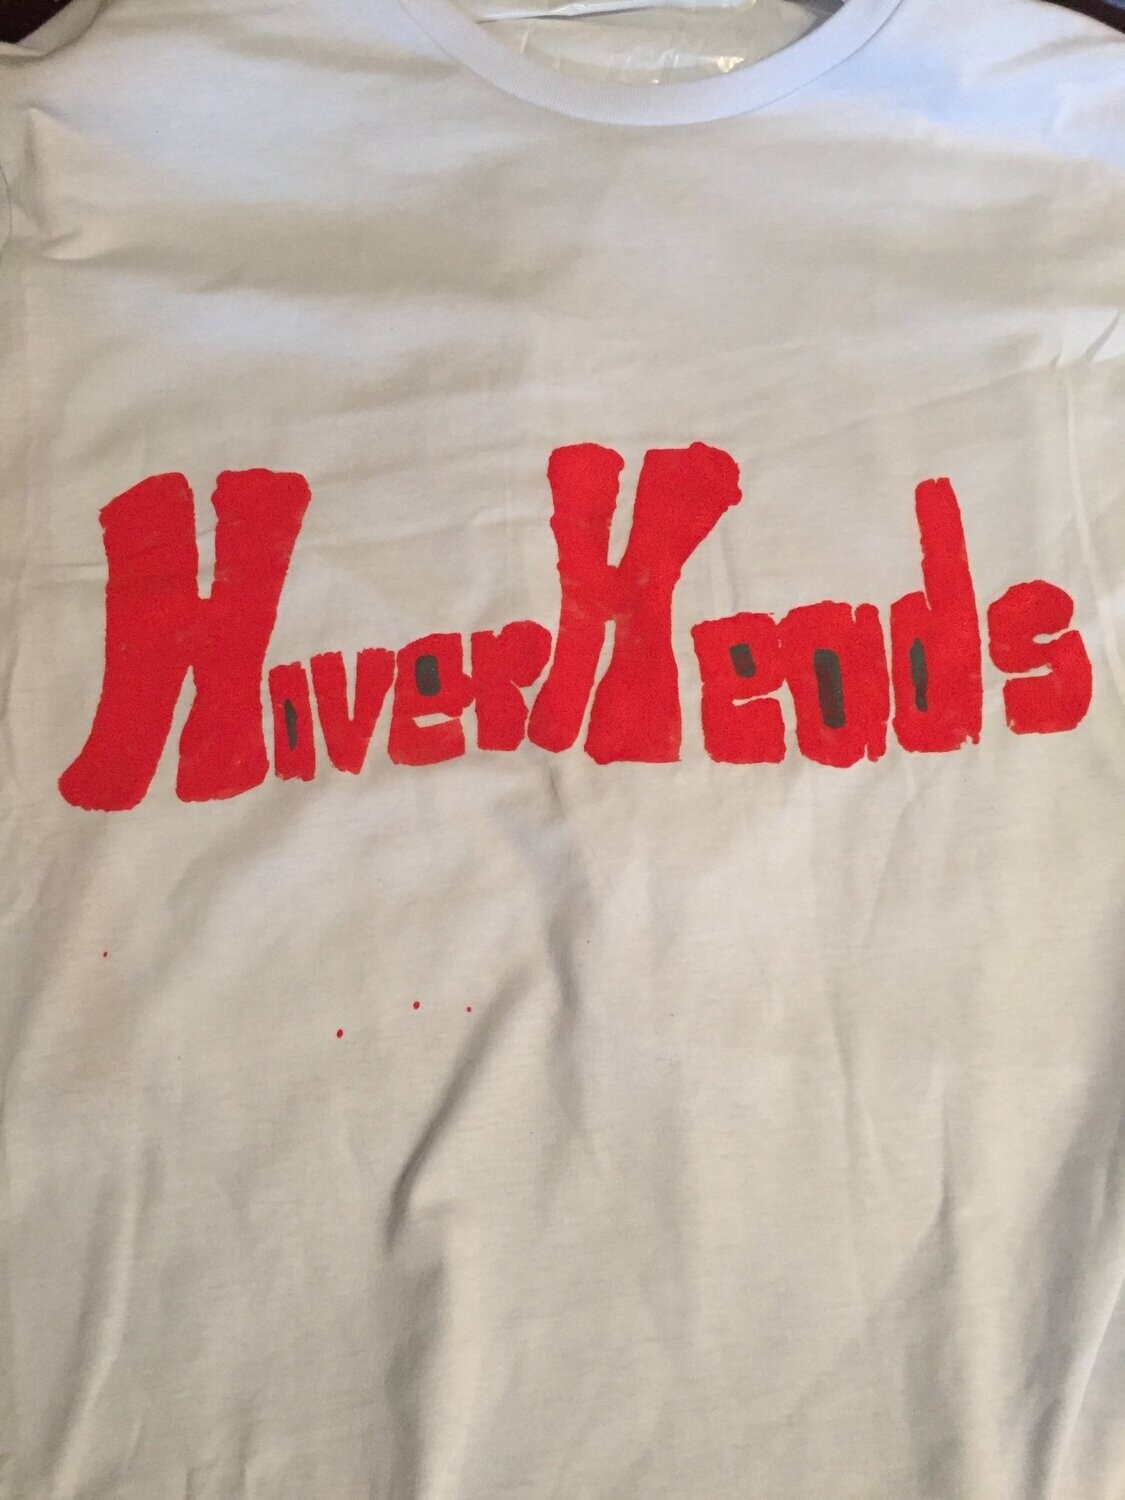 "HoverHeads" Shirt - Hand Stenciled